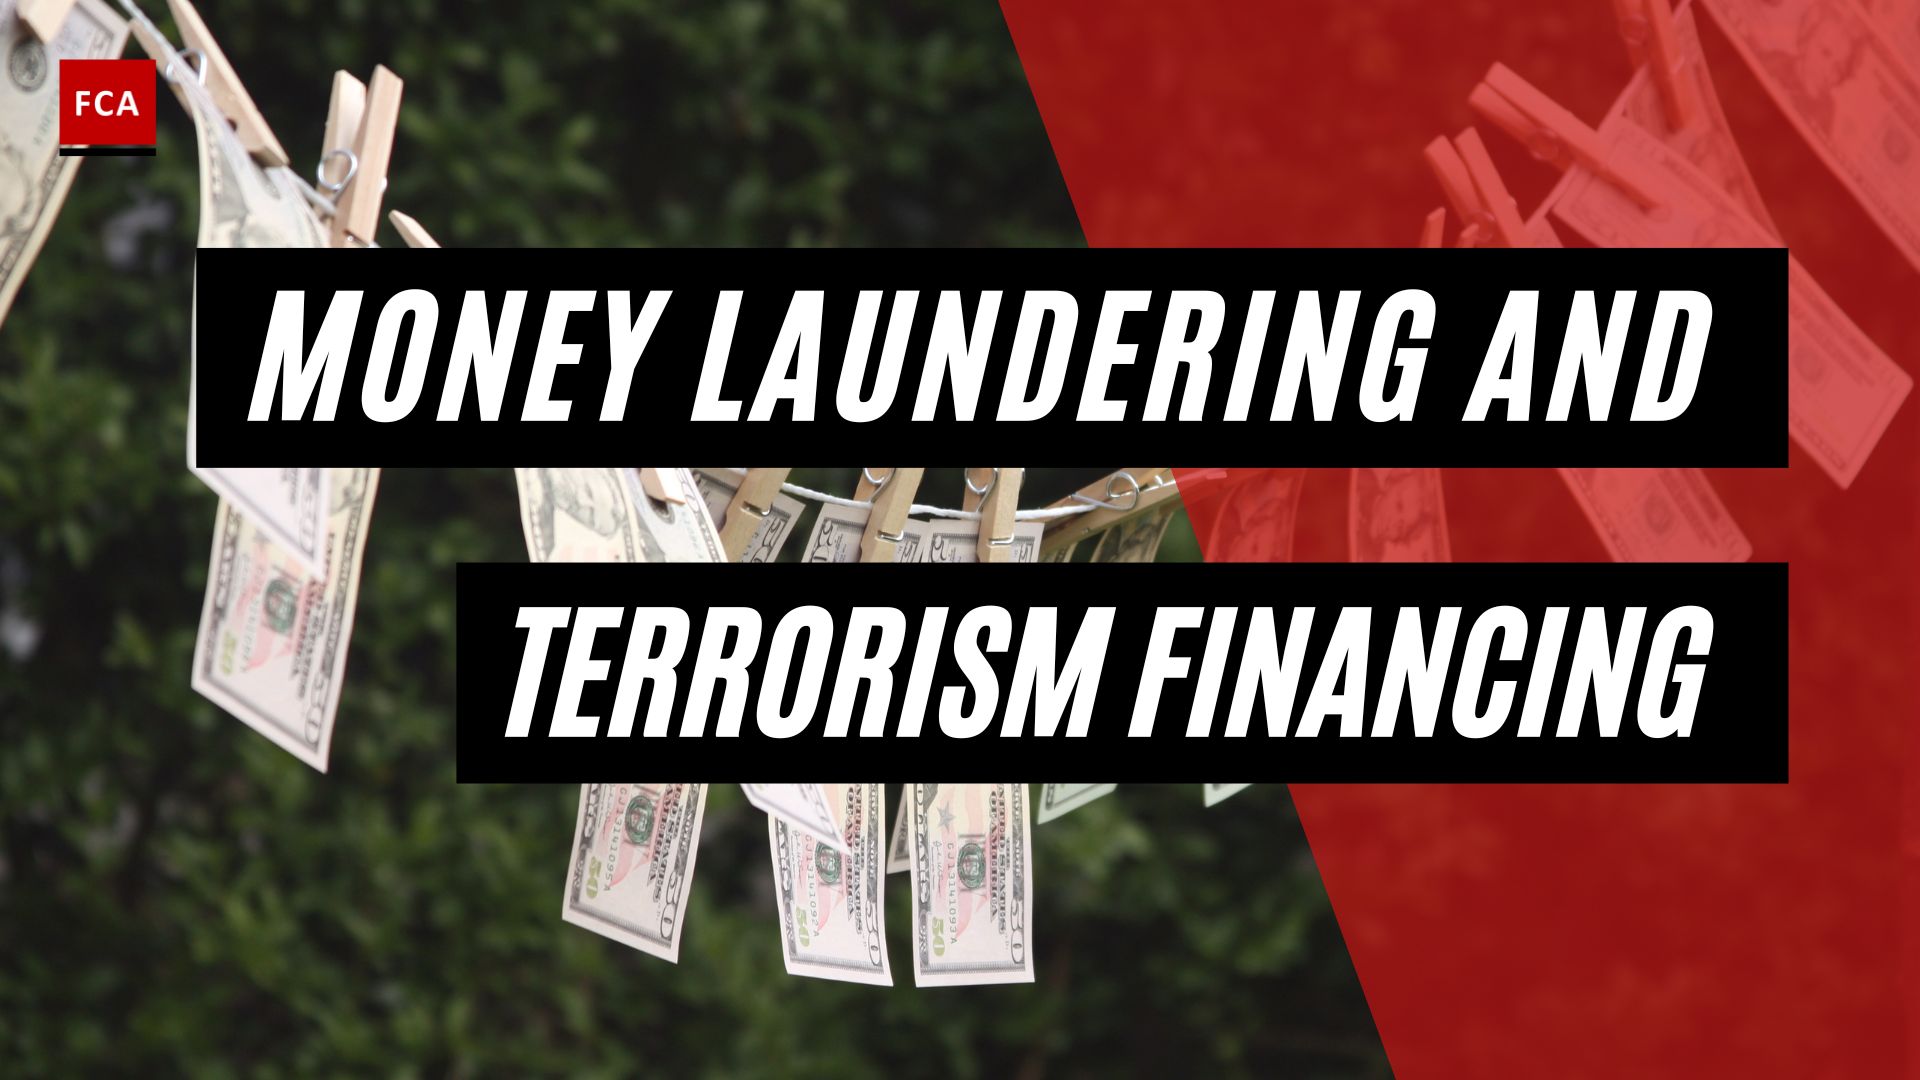 Similarities And Differences Between Money Laundering And Terrorism Financing